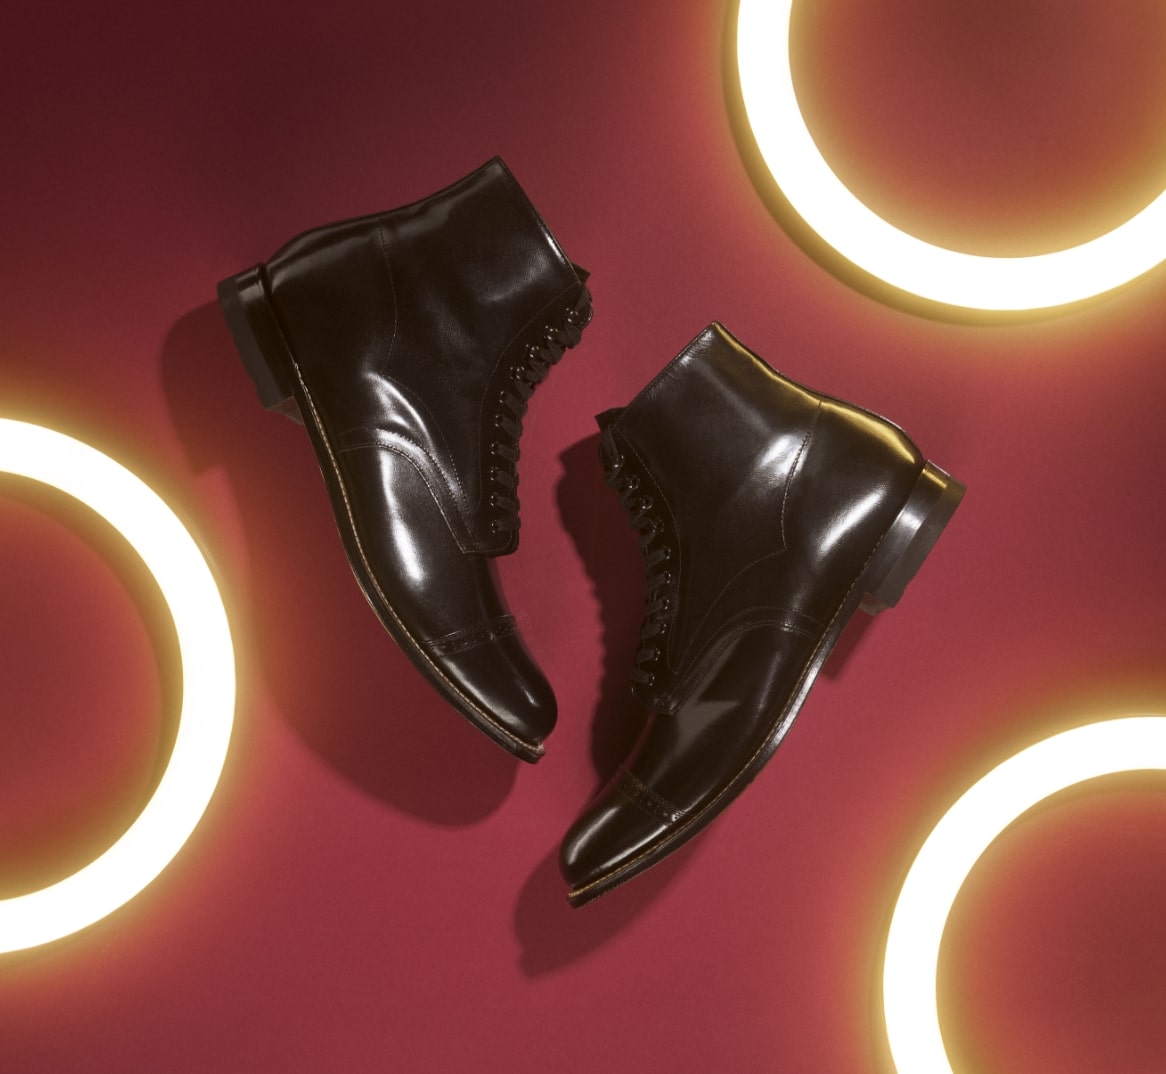 Stacy Adams classics featuring the Madison Cap Toe Boot in black.